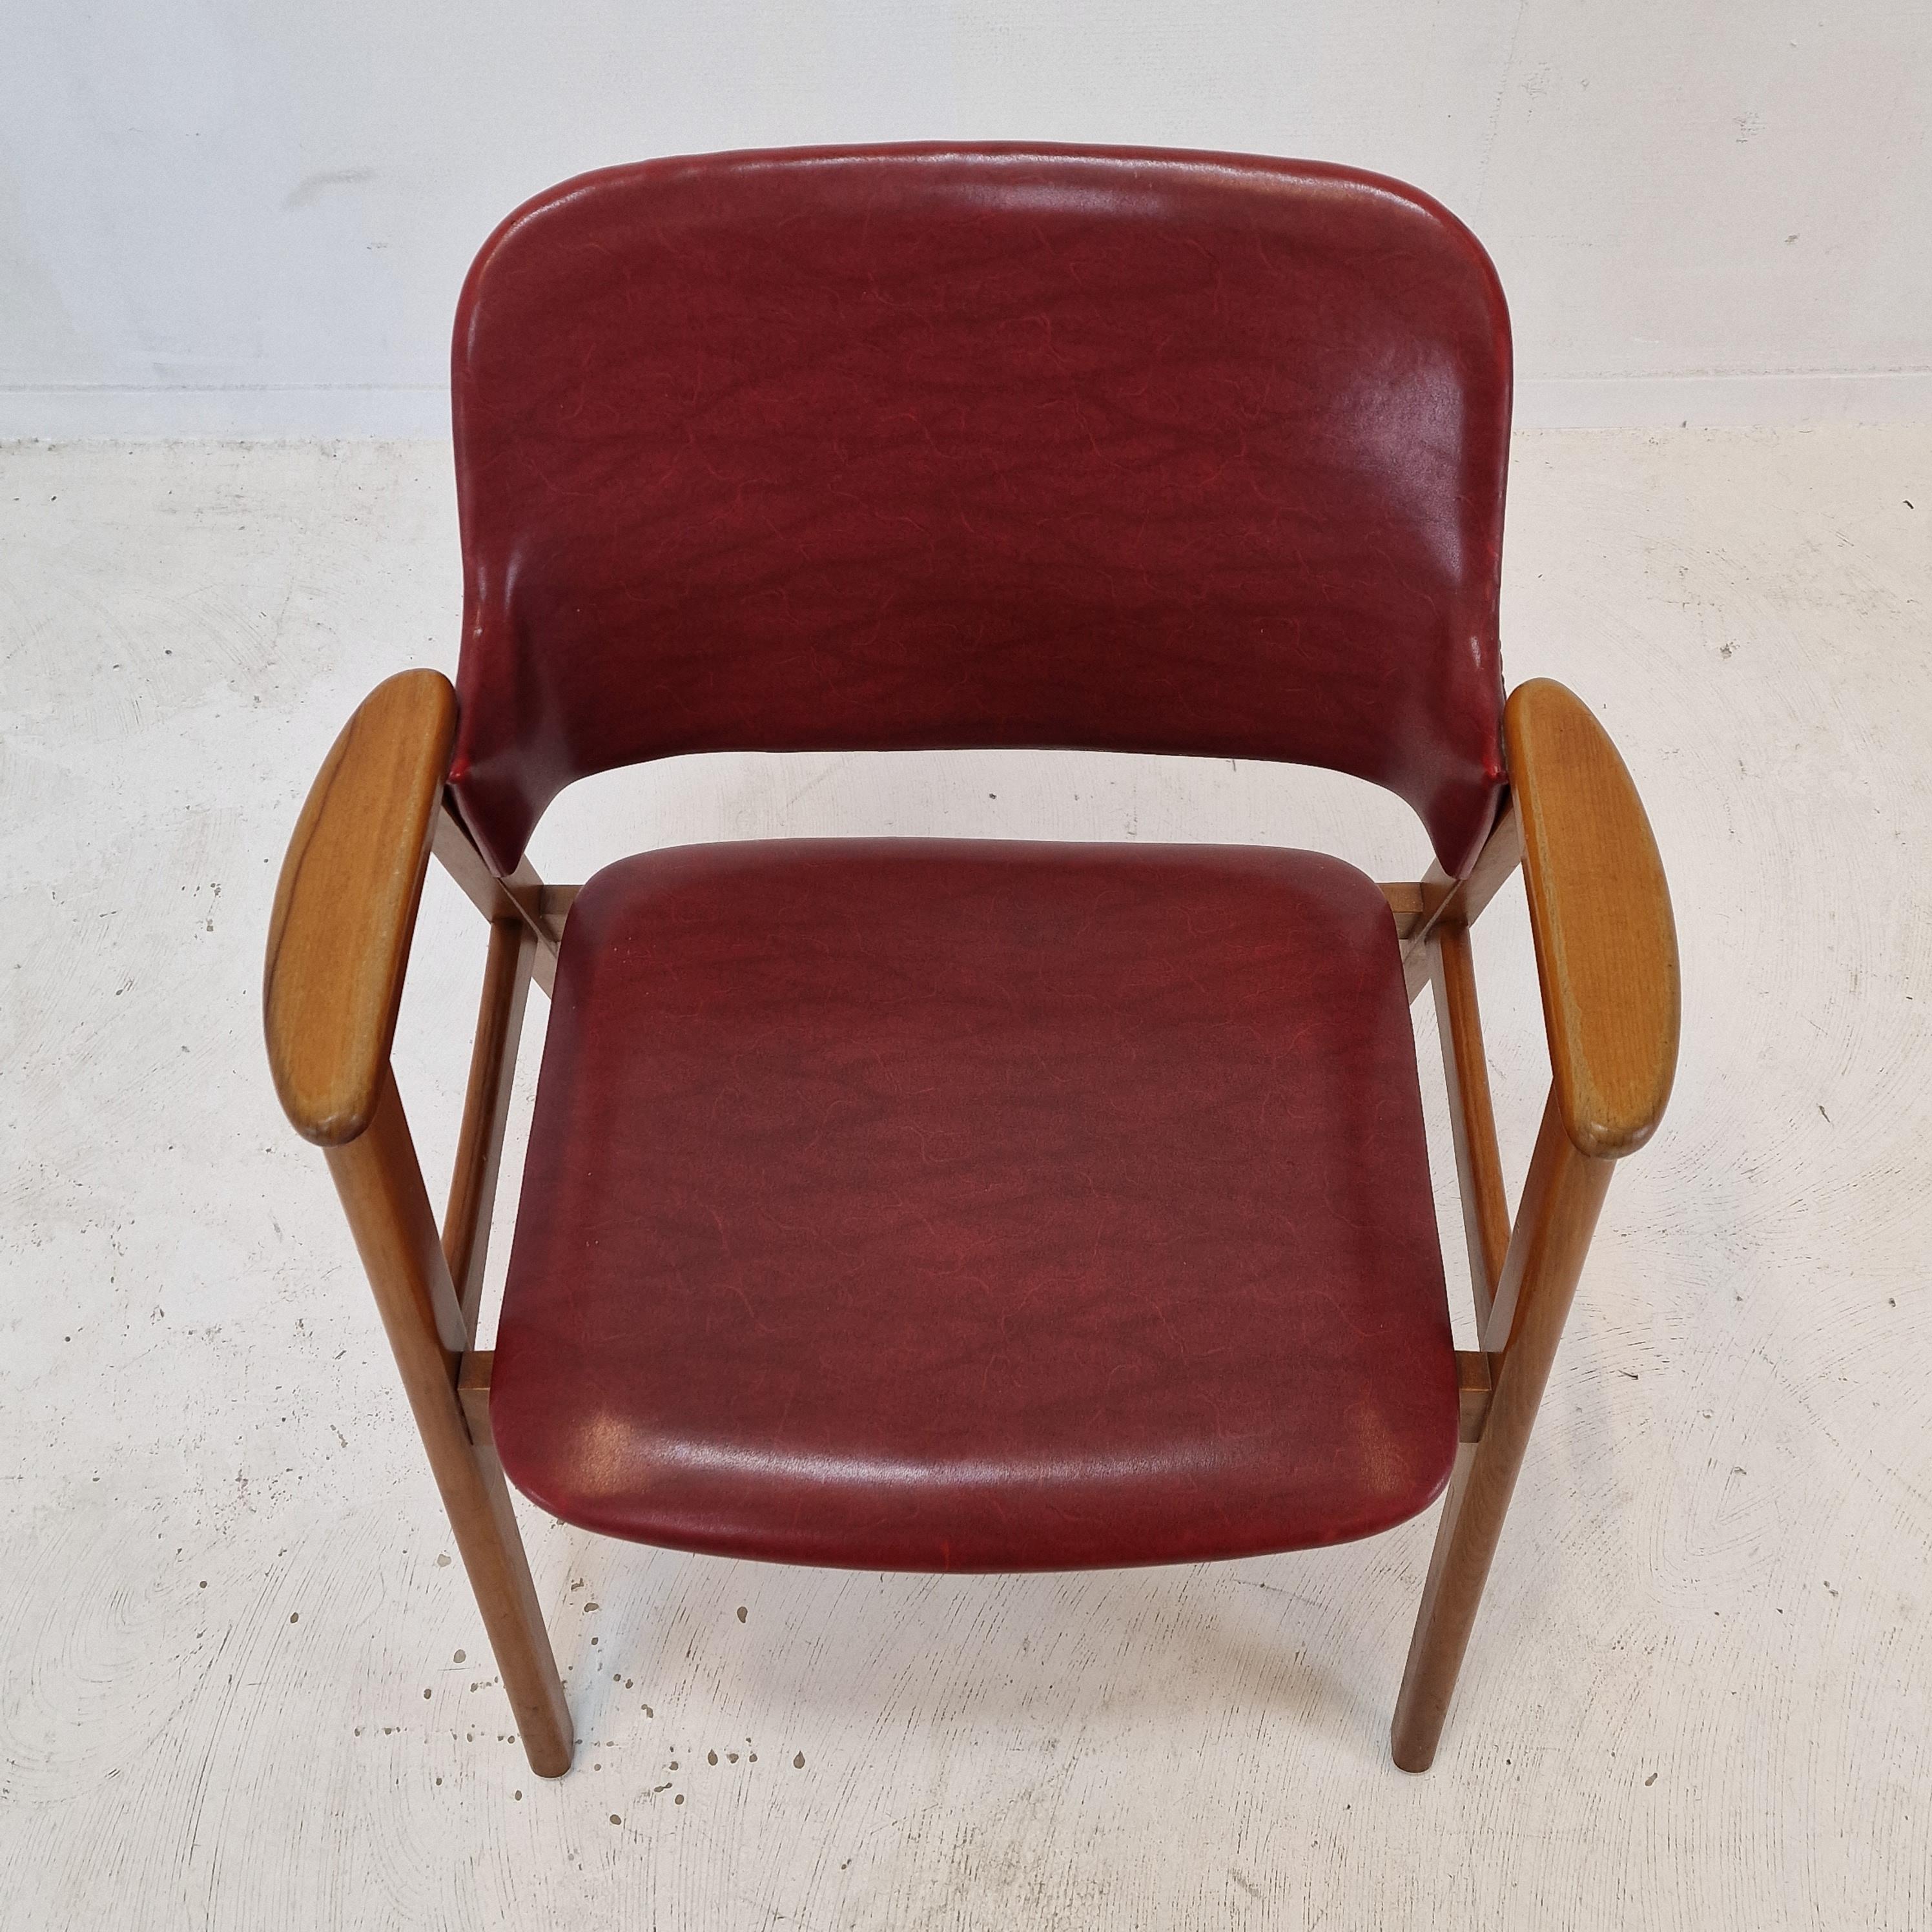 Midcentury Dining or Restaurant Chairs by Cees Braakman for Pastoe, 1950s For Sale 3